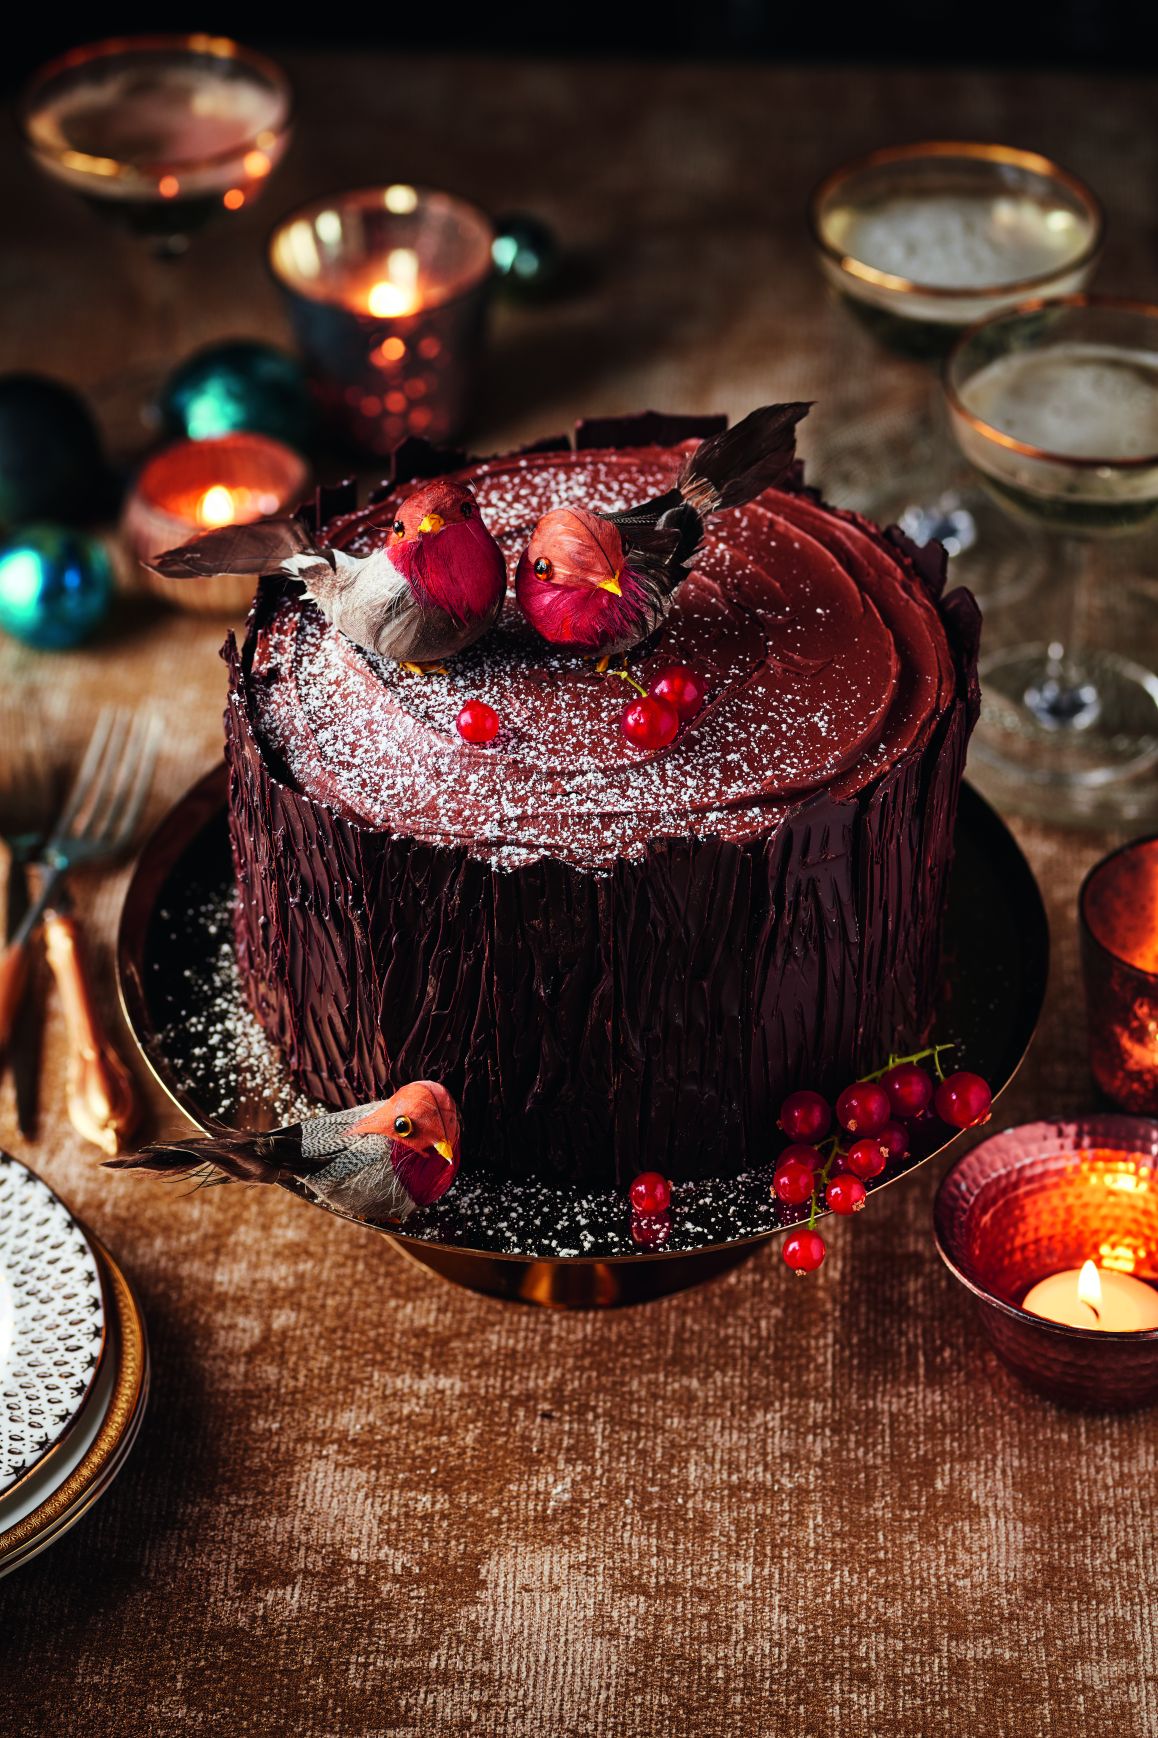 Prue Leith's Chocolate Yule Log - The Great British Bake Off